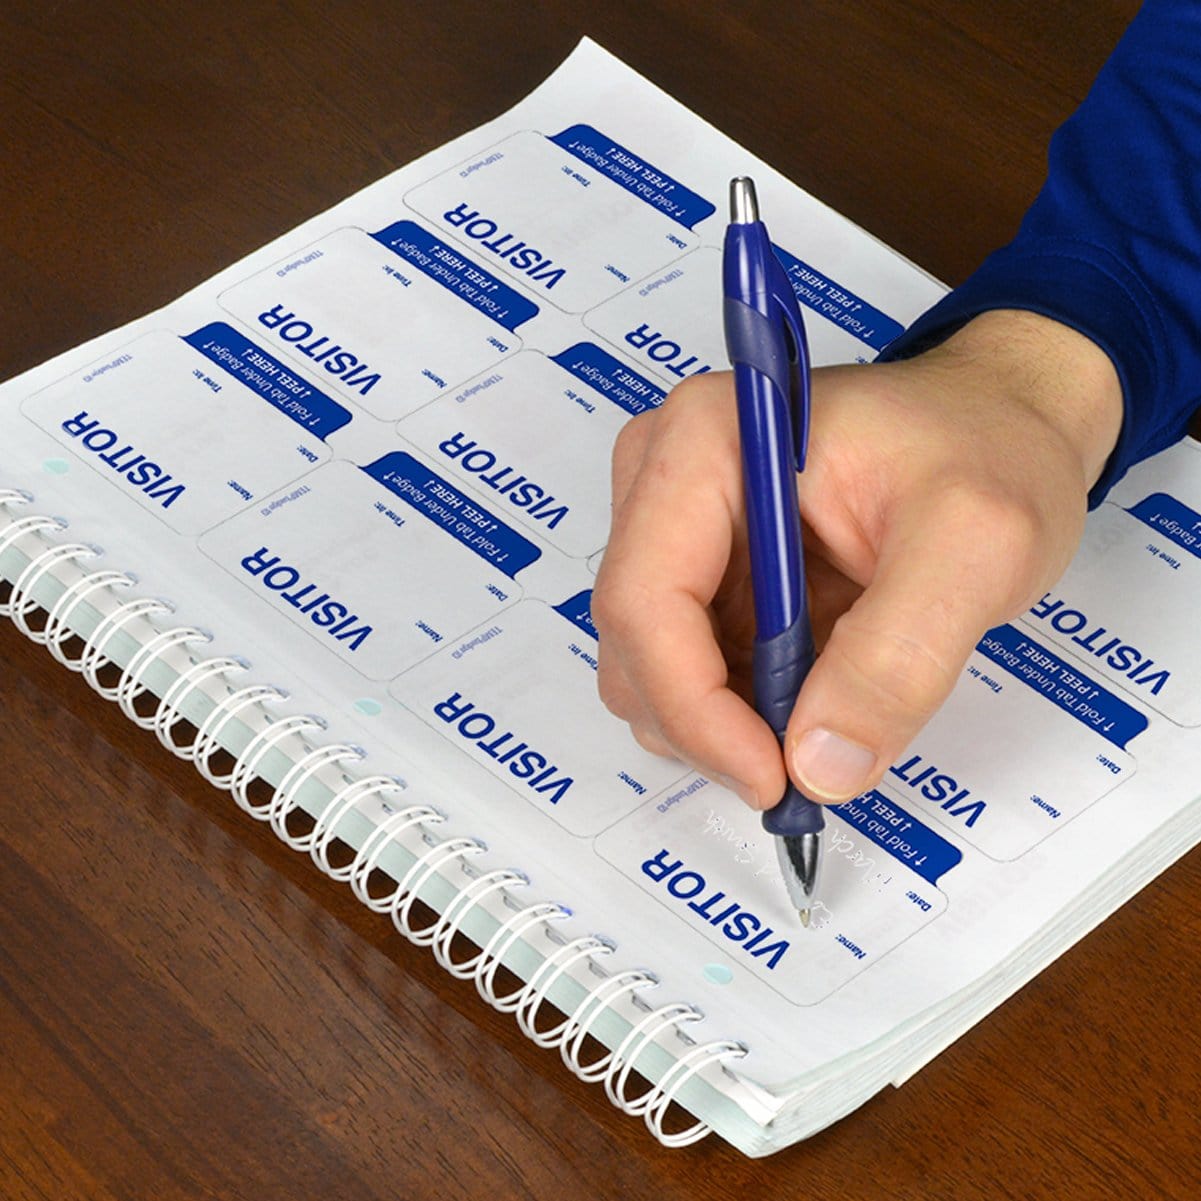 A person is meticulously writing on a sheet of Expiring Visitor Badge and Log Book - 480 Badges (05741) using a blue pen, ensuring accurate entries for the visitor management system.